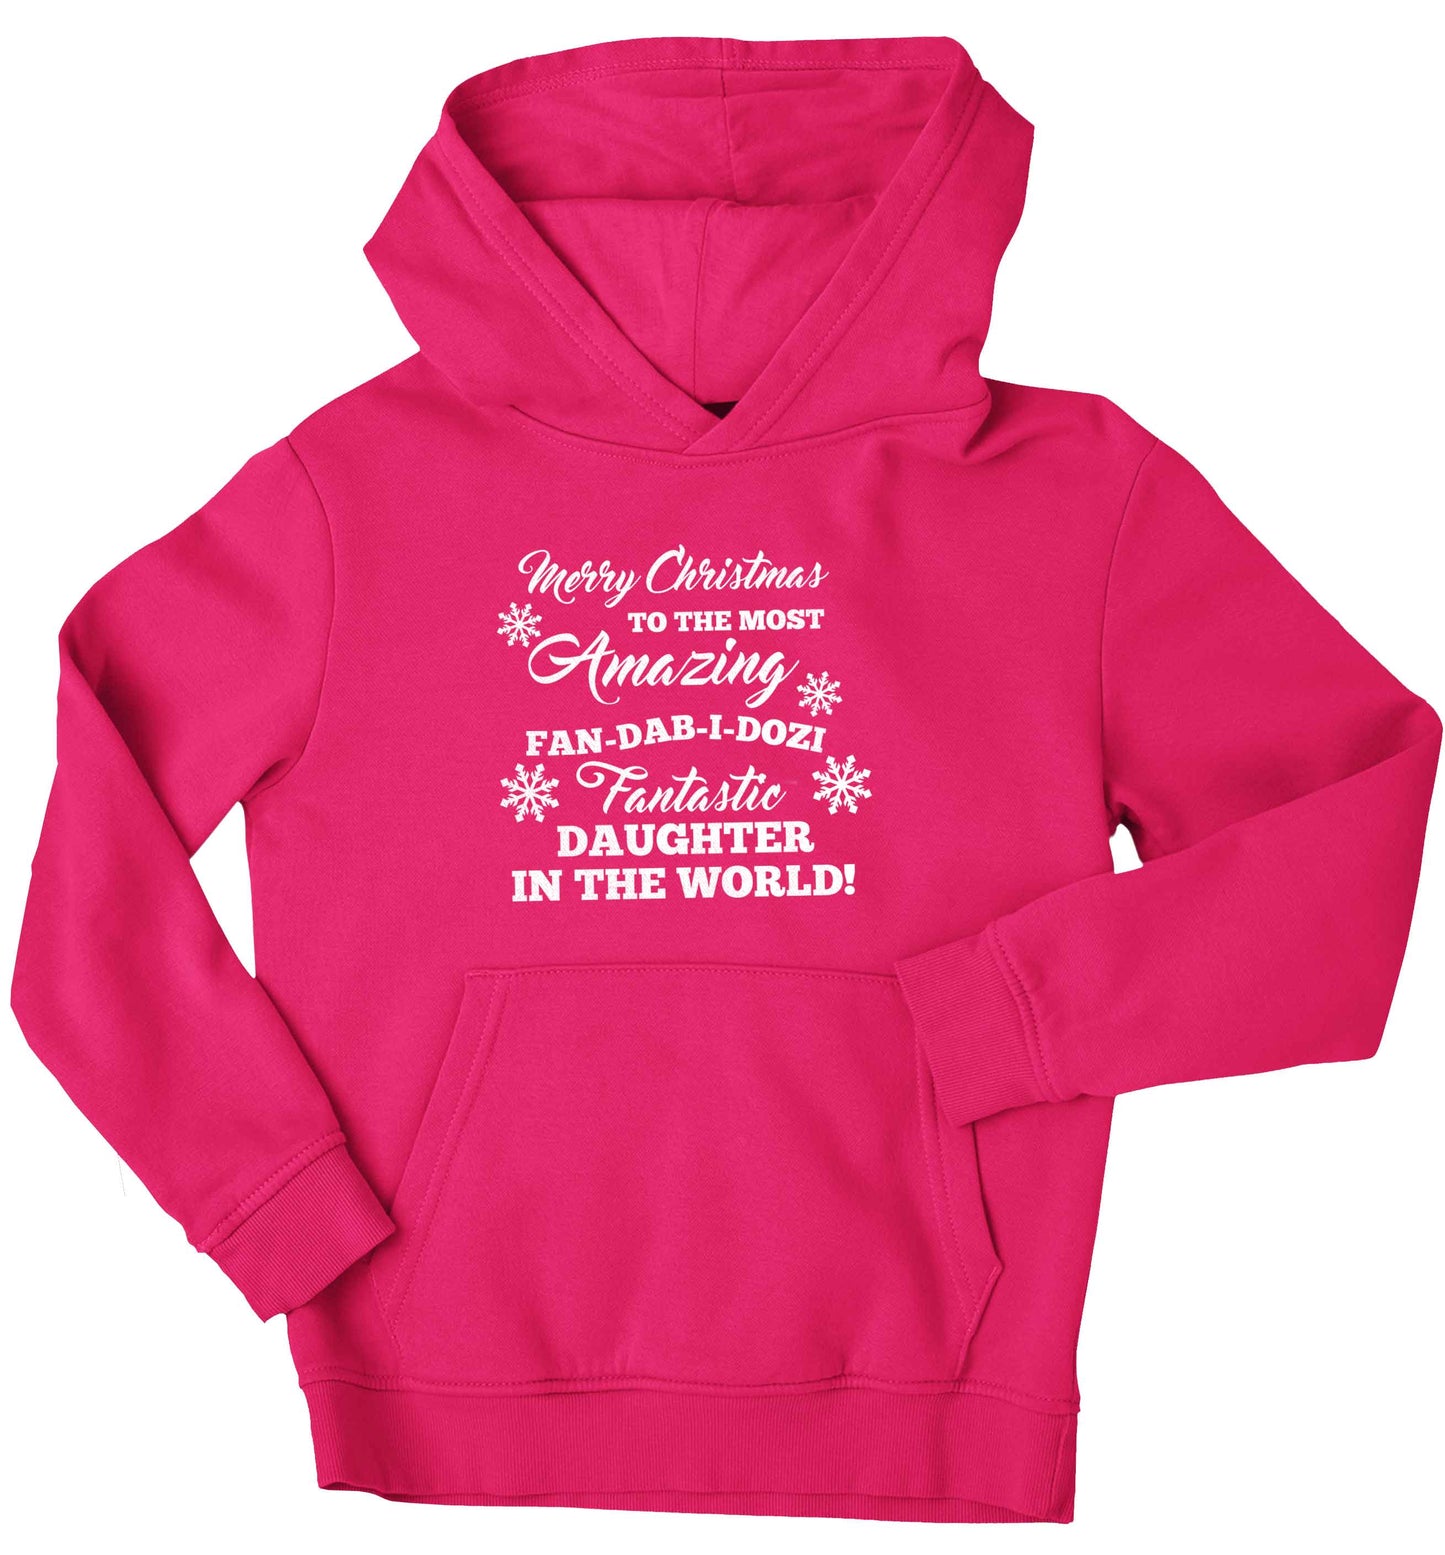 Merry Christmas to the most amazing fan-dab-i-dozi fantasic Daughter in the world children's pink hoodie 12-13 Years